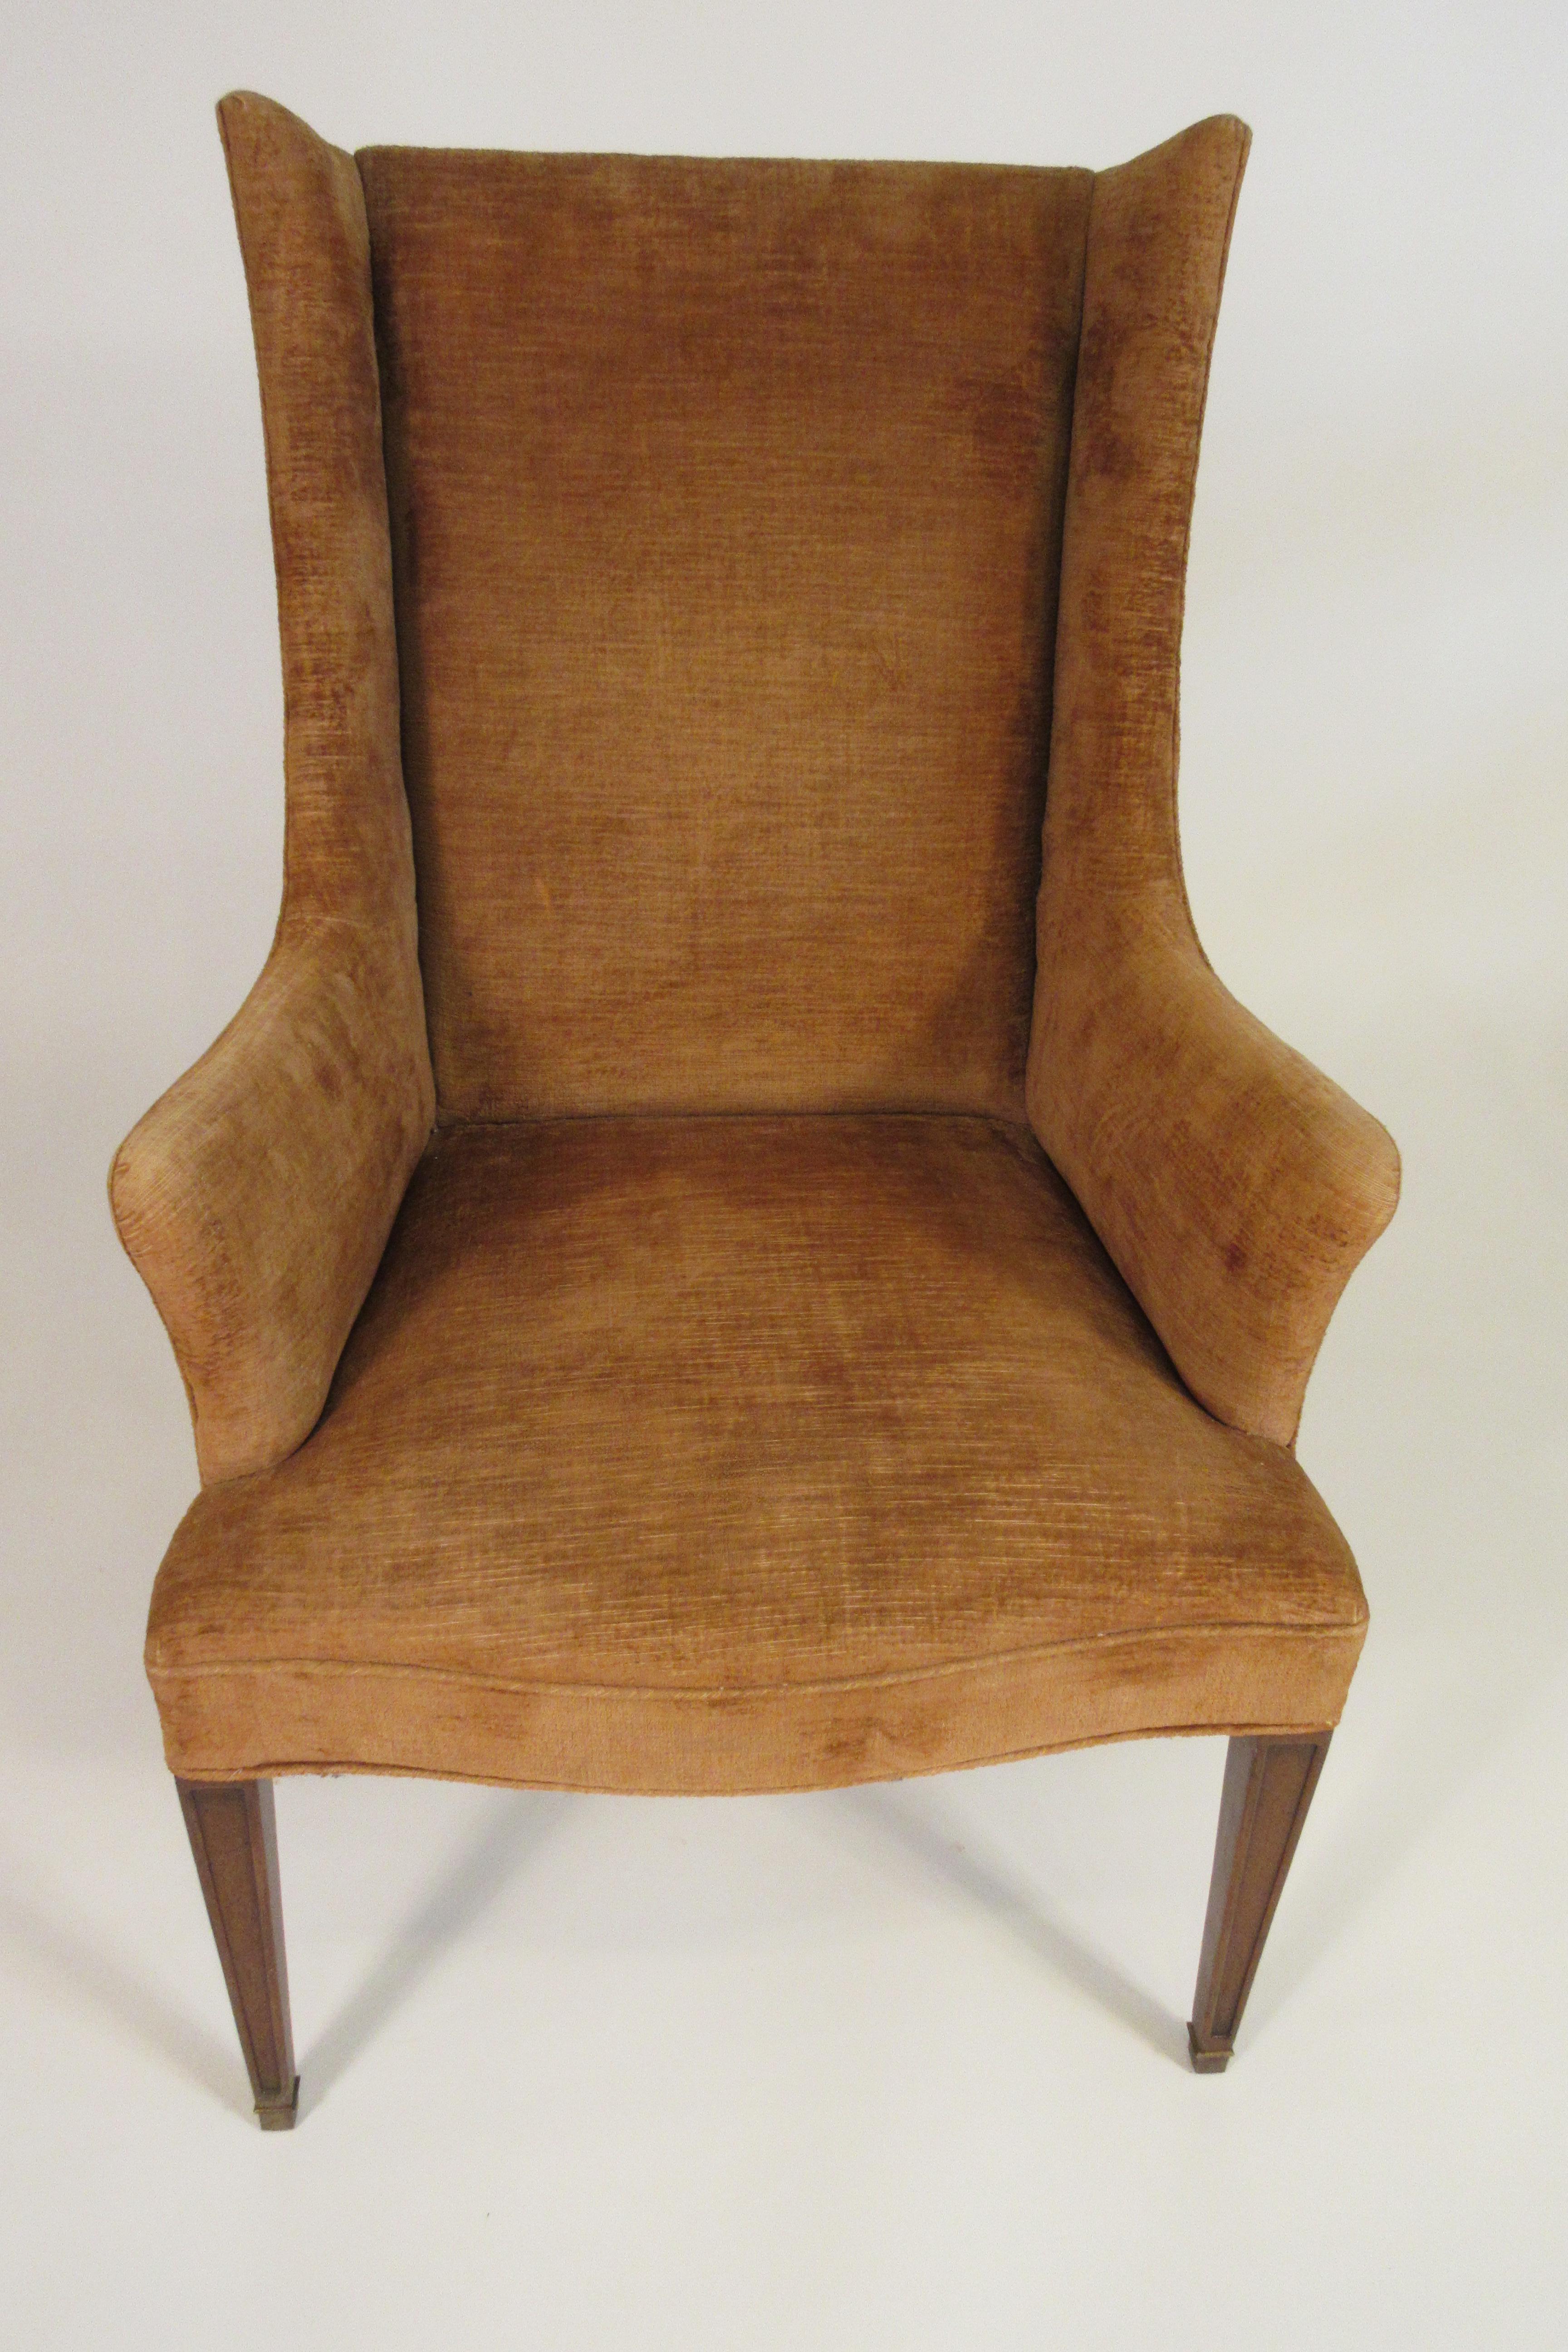 Pair of 1950s wingback chairs. Needs re-upholstery. Wood needs refinishing.